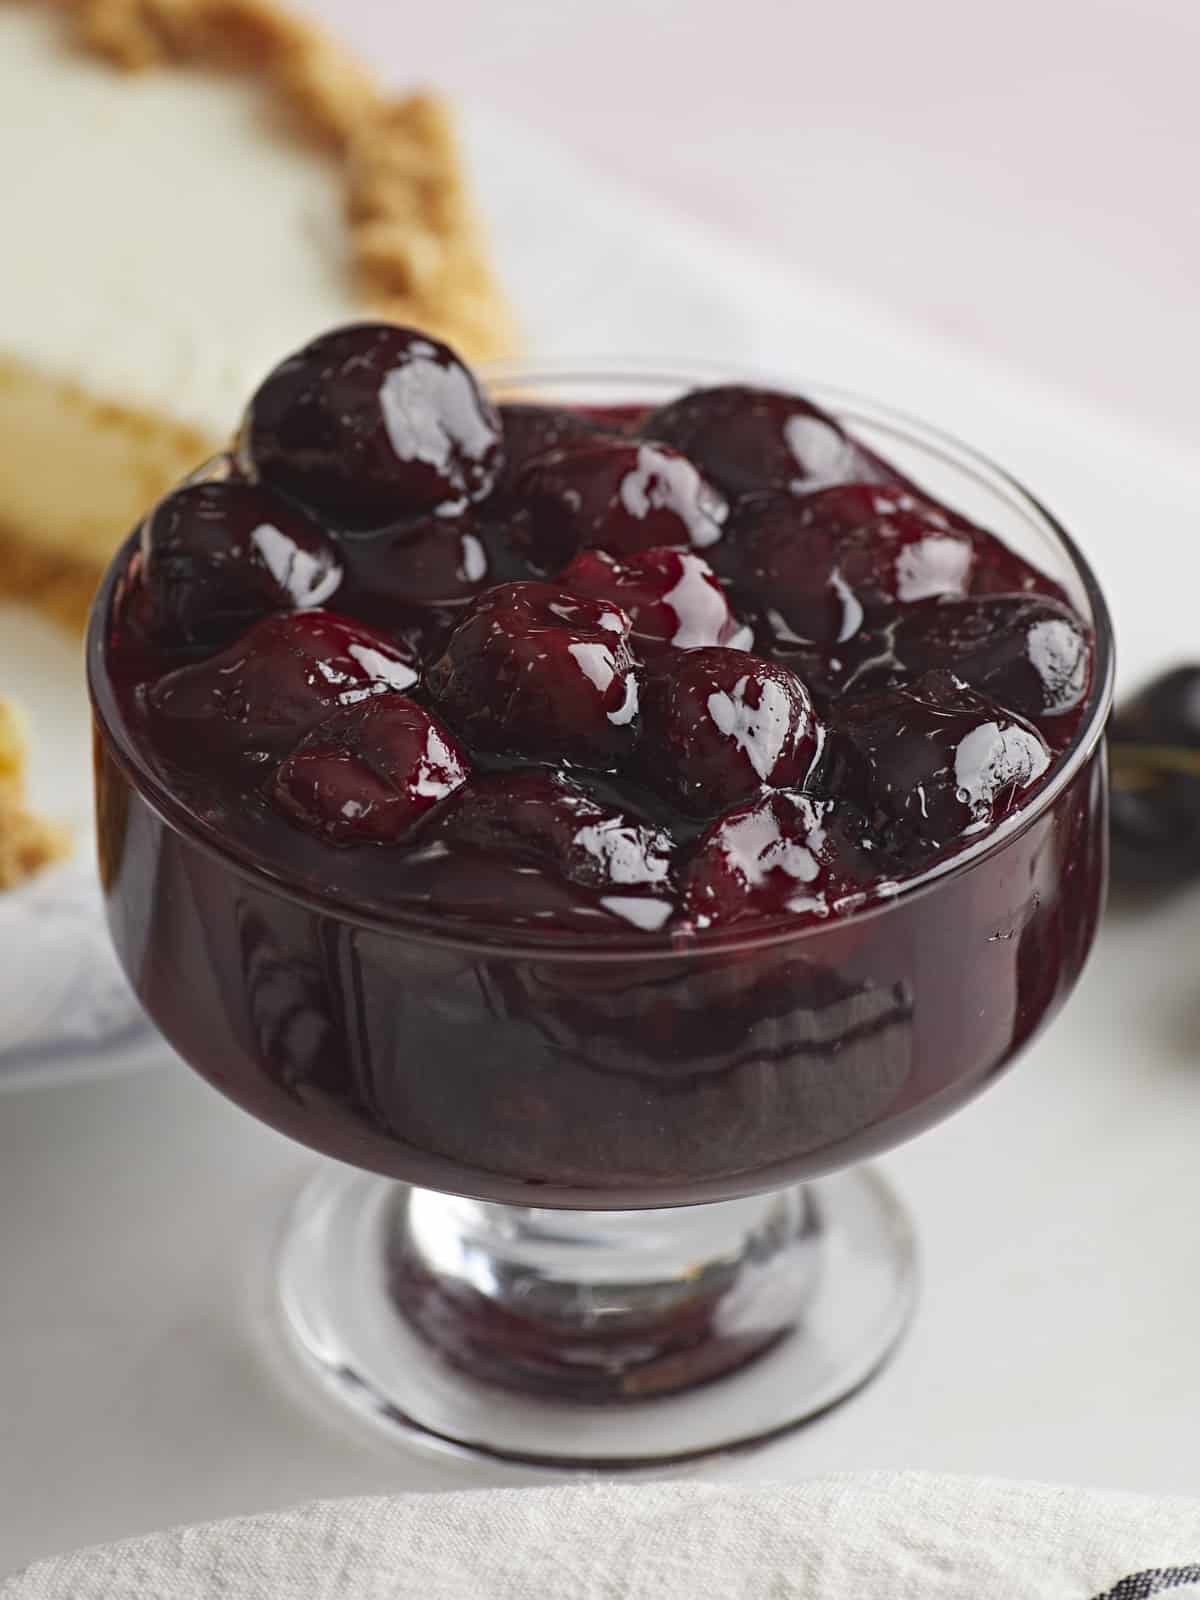 Finished cherry sauce in a glass dish, viewed from the side.